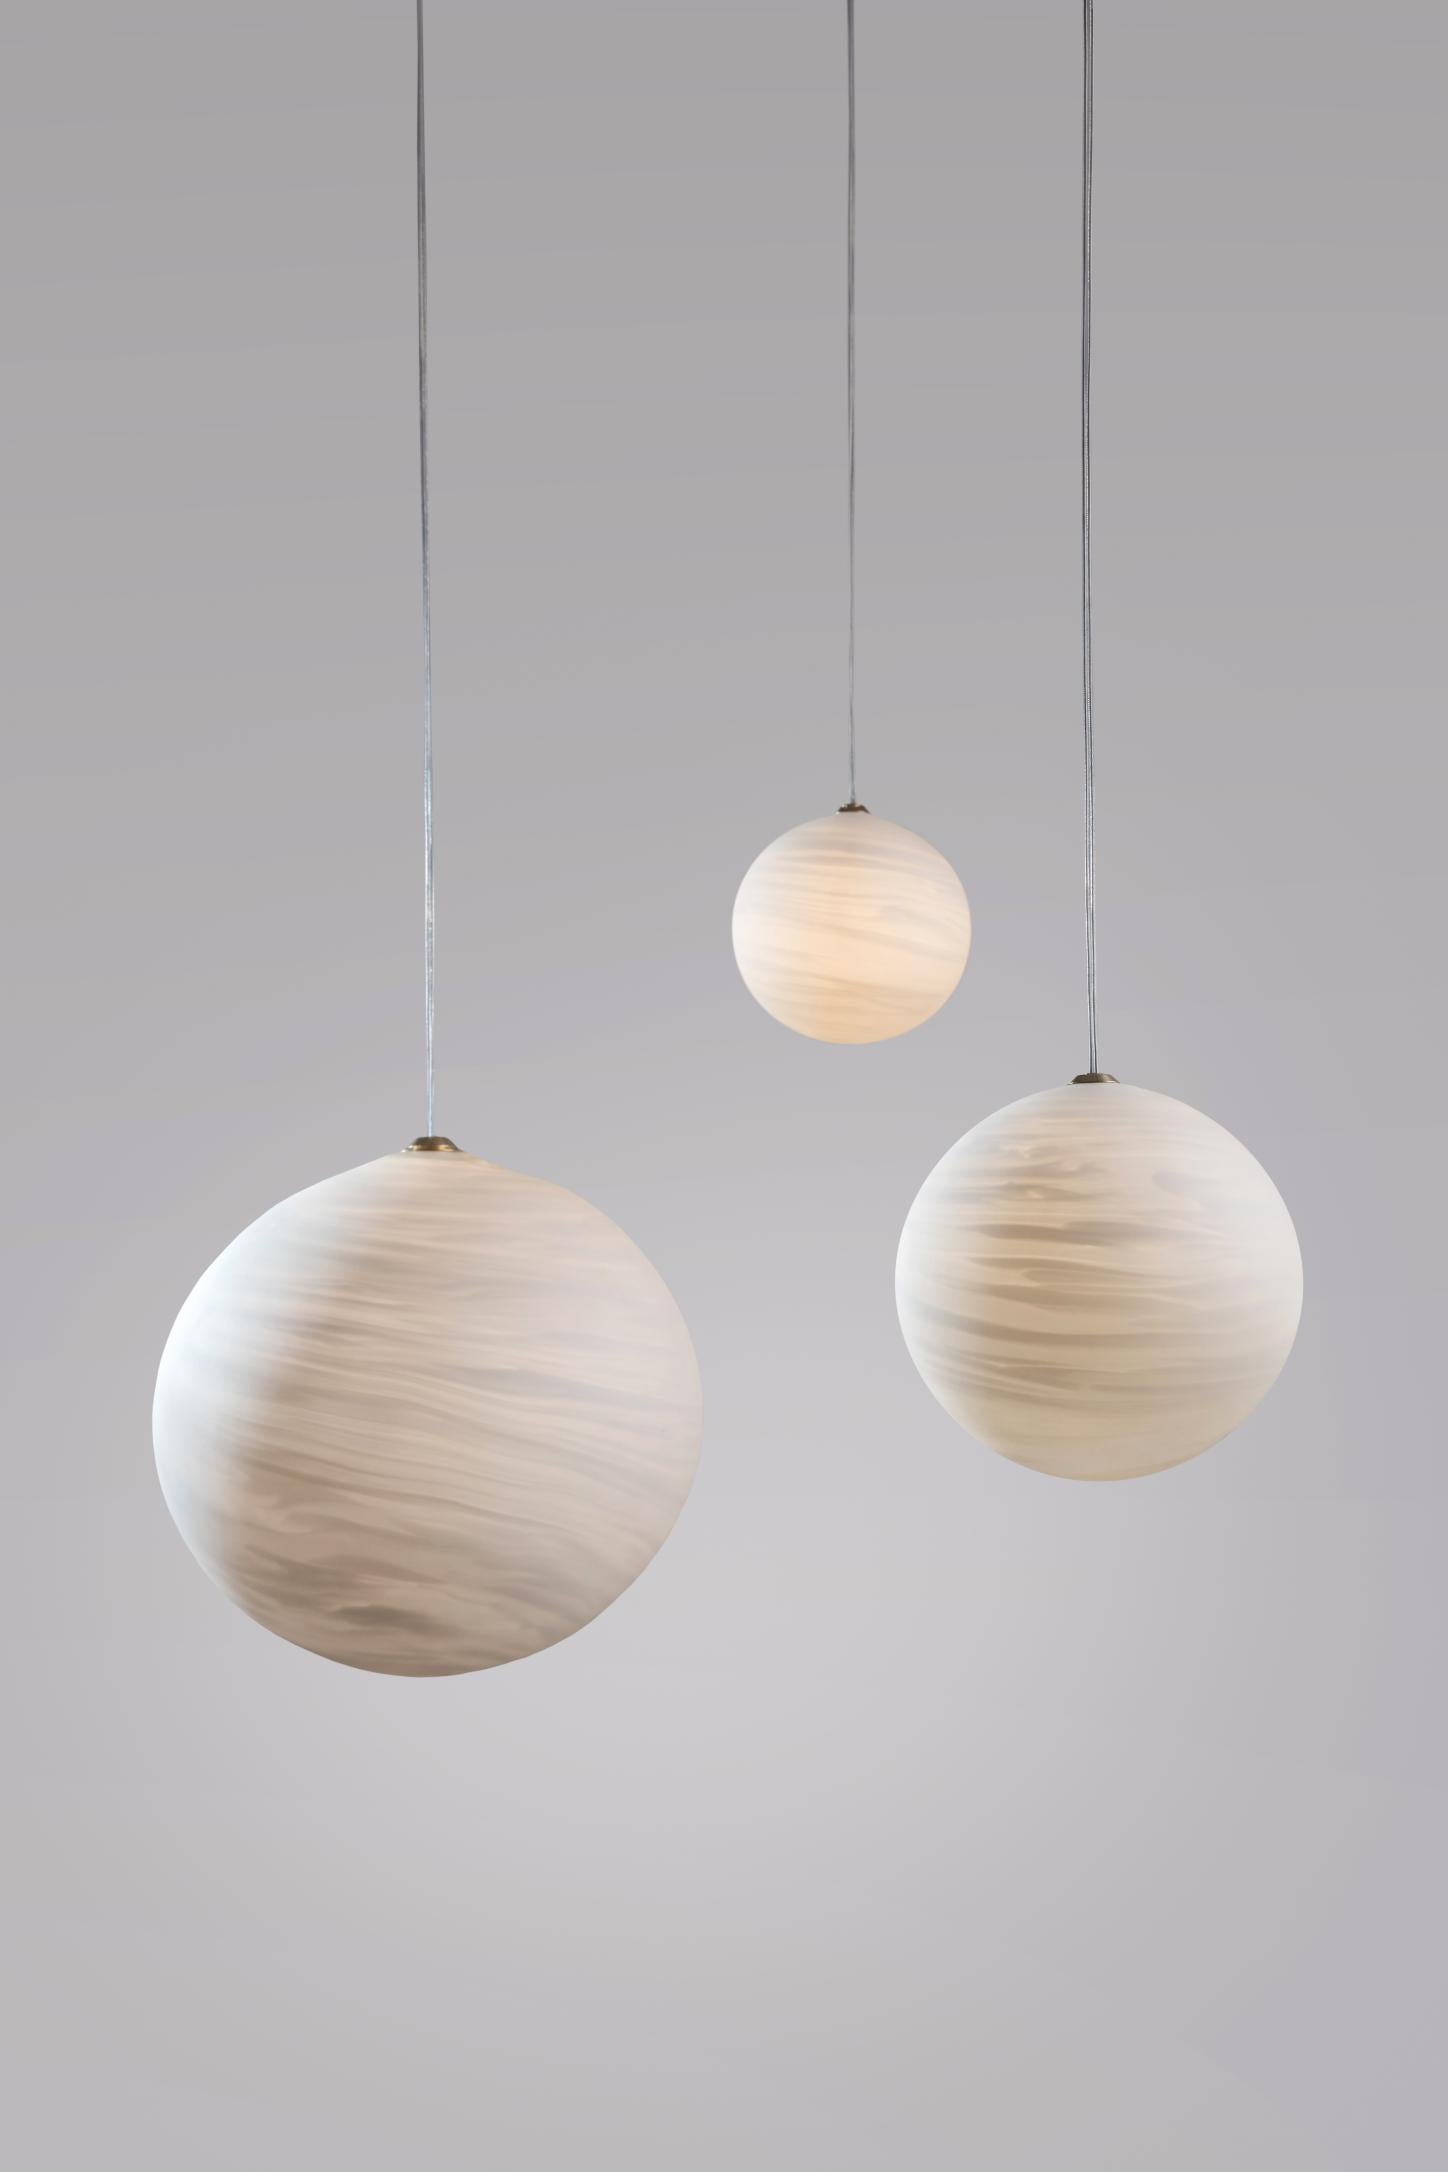 Jupiter hanging lights planets, Ludovic Clément d’Armont
Every creation of Ludovic Clément d’Armont can be made to order in any requested dimensions. 
Blown glass
Dimensions of the planets can vary in the following dimensions: 10 cm, 14 cm, 18